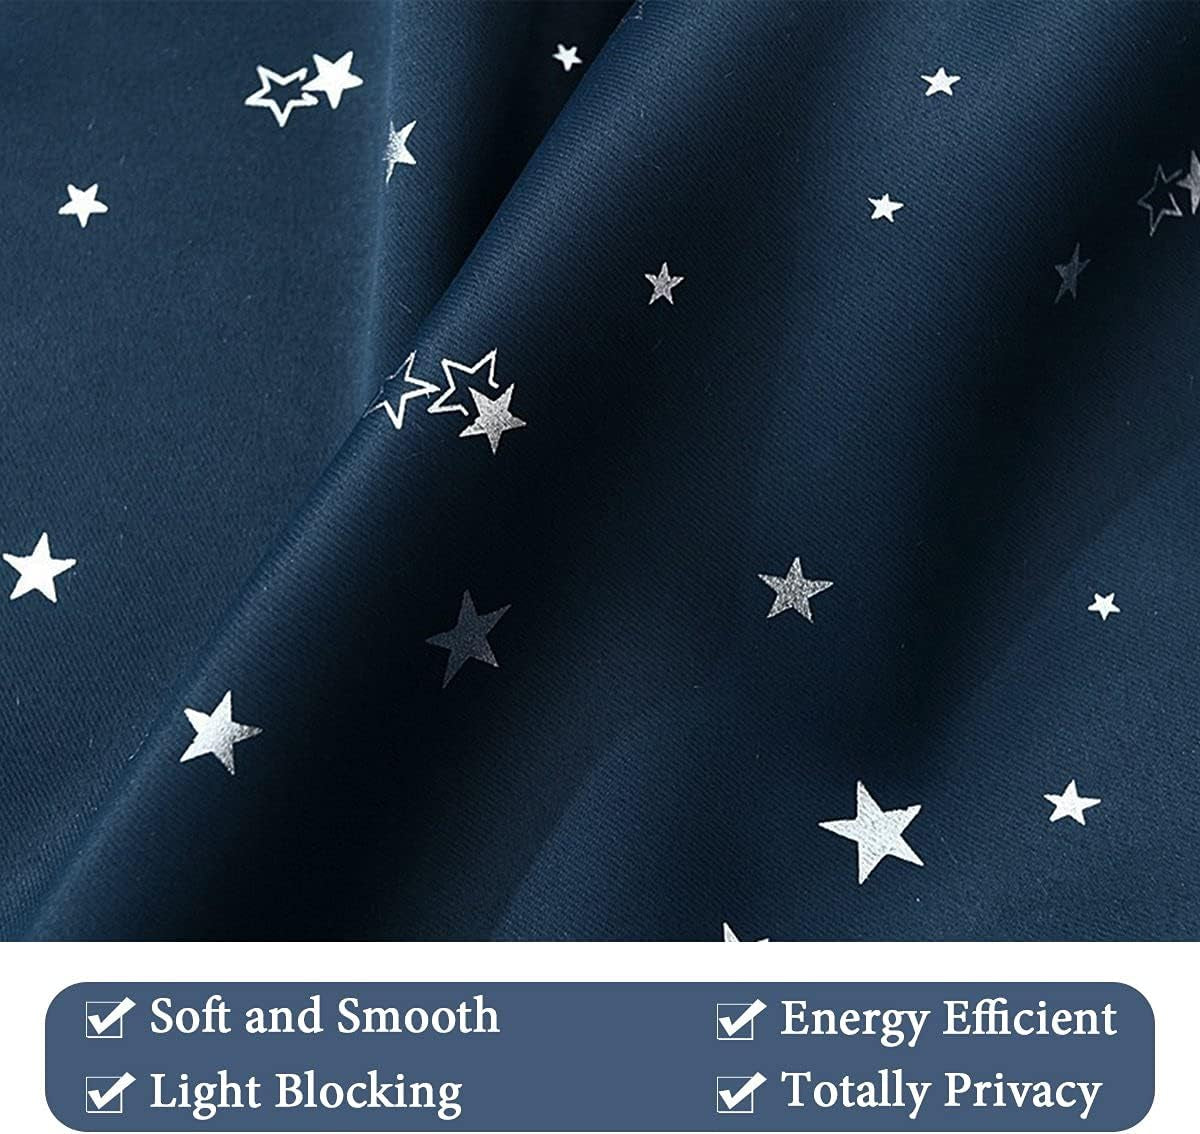 H.VERSAILTEX Blackout Star Curtains for Kids Room Boys Girls Twinkle Silver Stars Thermal Insulated Cute Thick Soft Curtain Drapes, Grommet Top, 1 Panel, 52" W X 96" L, Navy  H.VERSAILTEX   